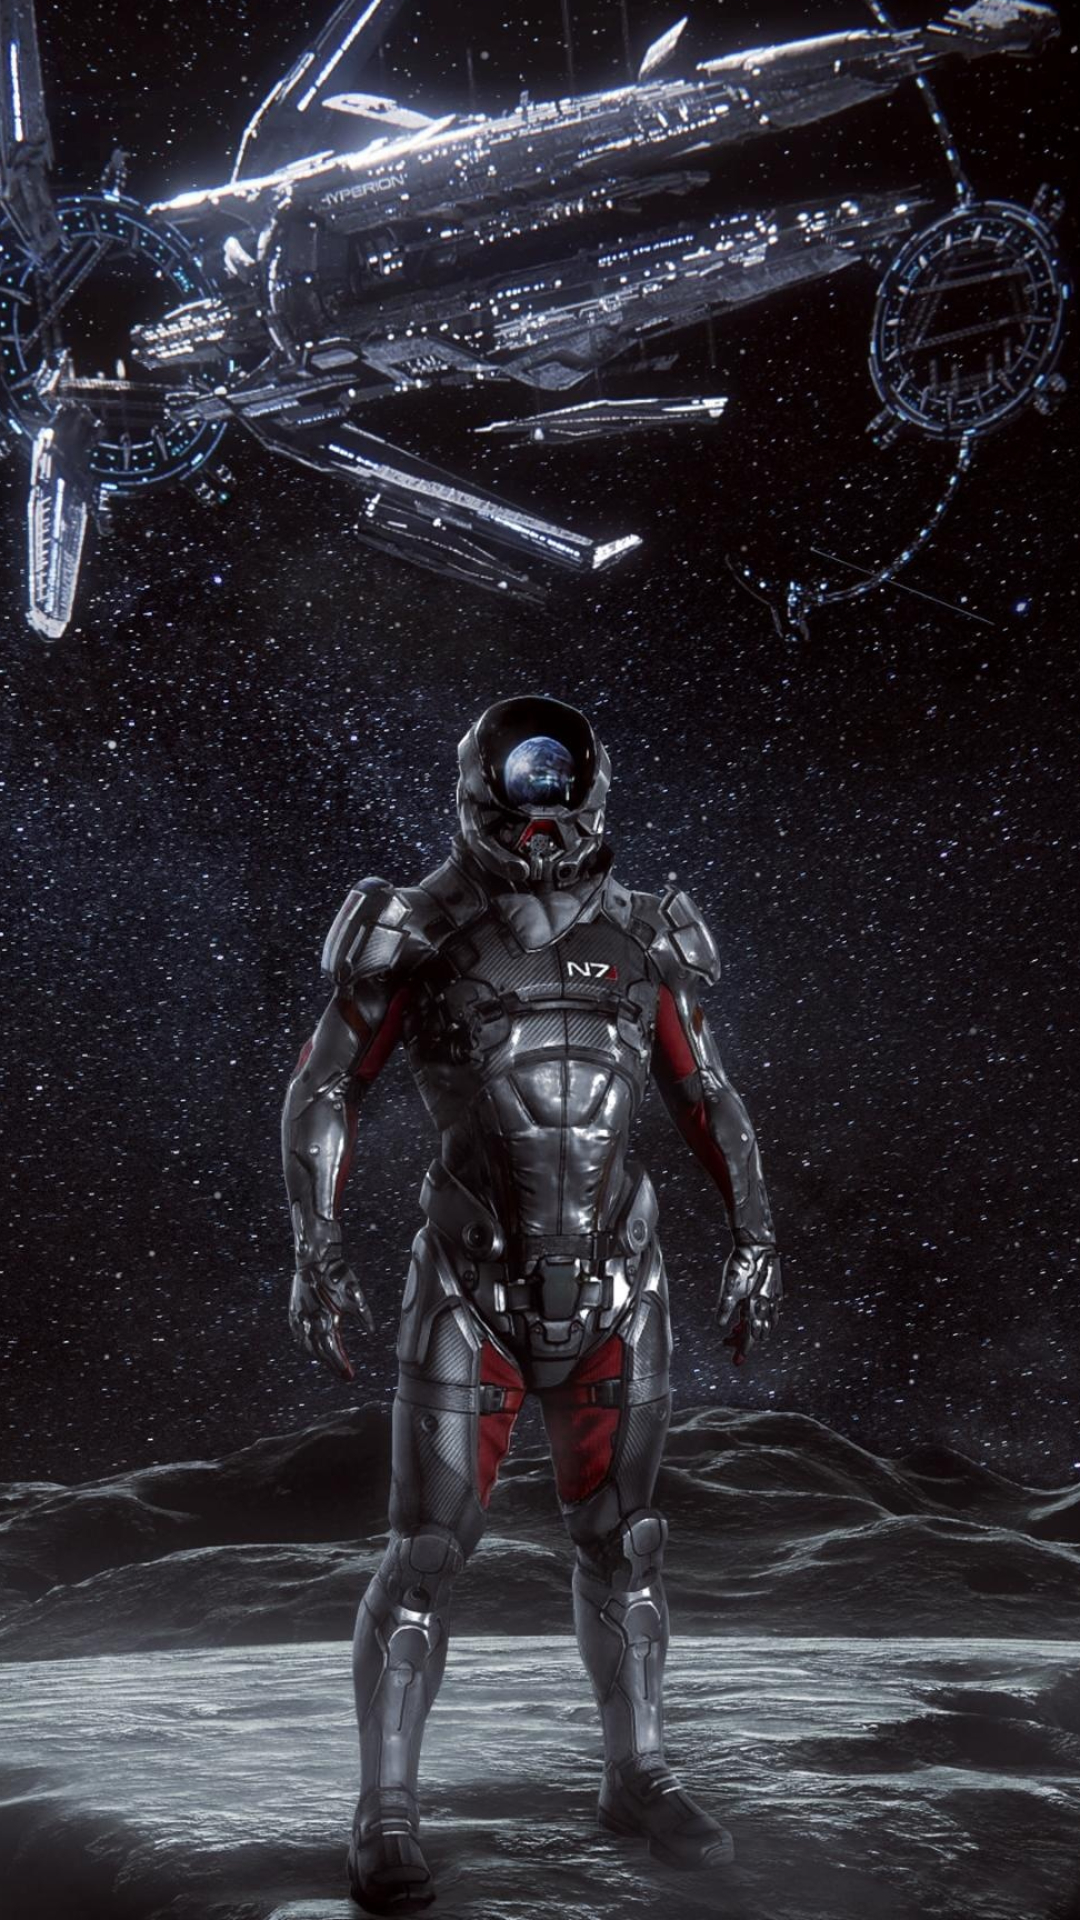 Mass Effect: Andromeda mobile, Gear up your phone, Stunning wallpapers, Dynamic backgrounds, 1080x1920 Full HD Phone